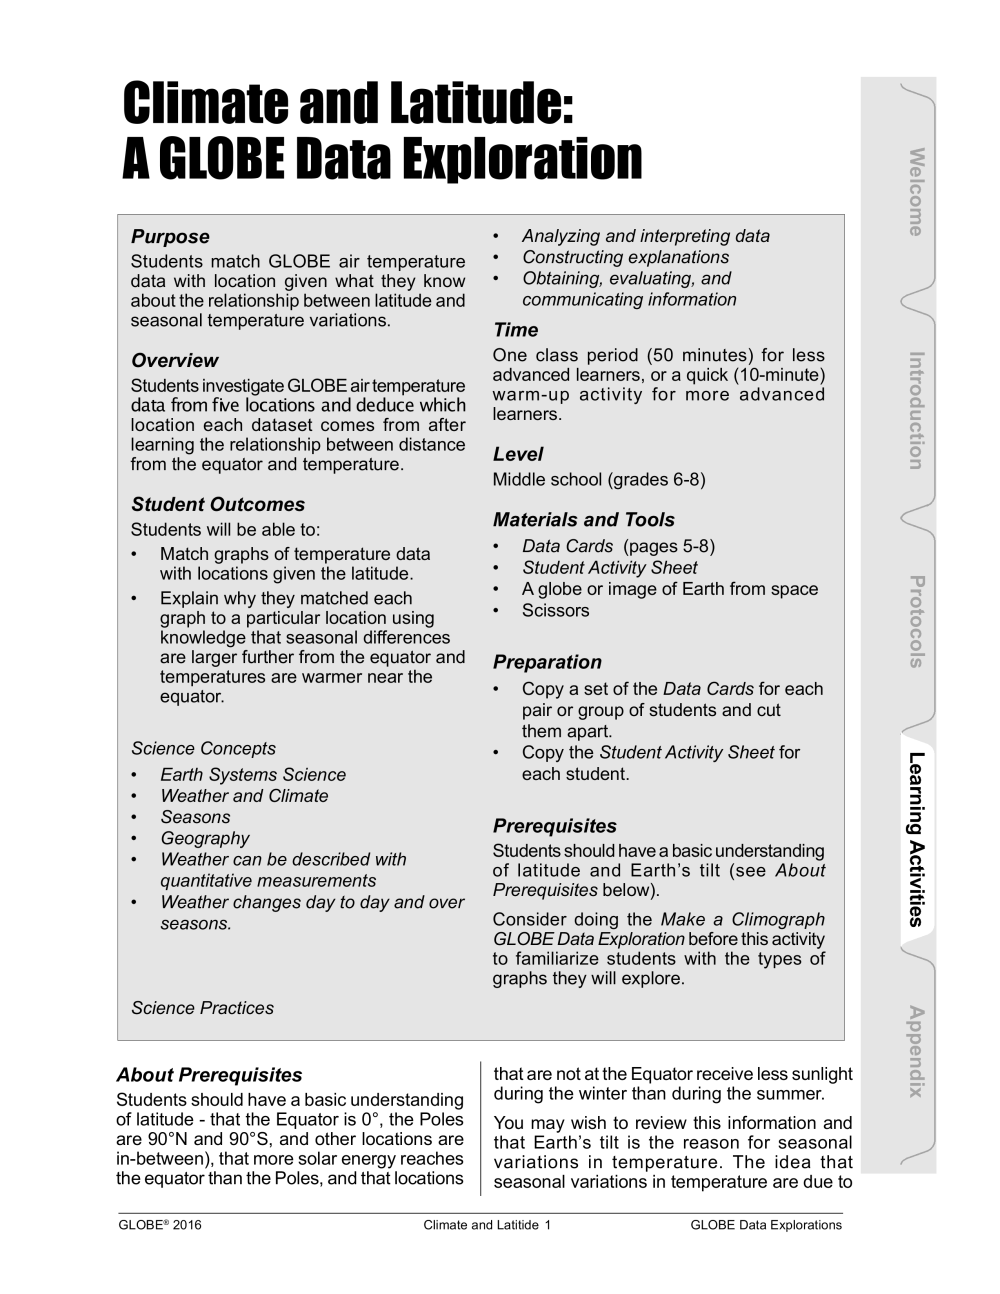 Learning Activities preview for Climate and Latitude- A GLOBE Data Exploration